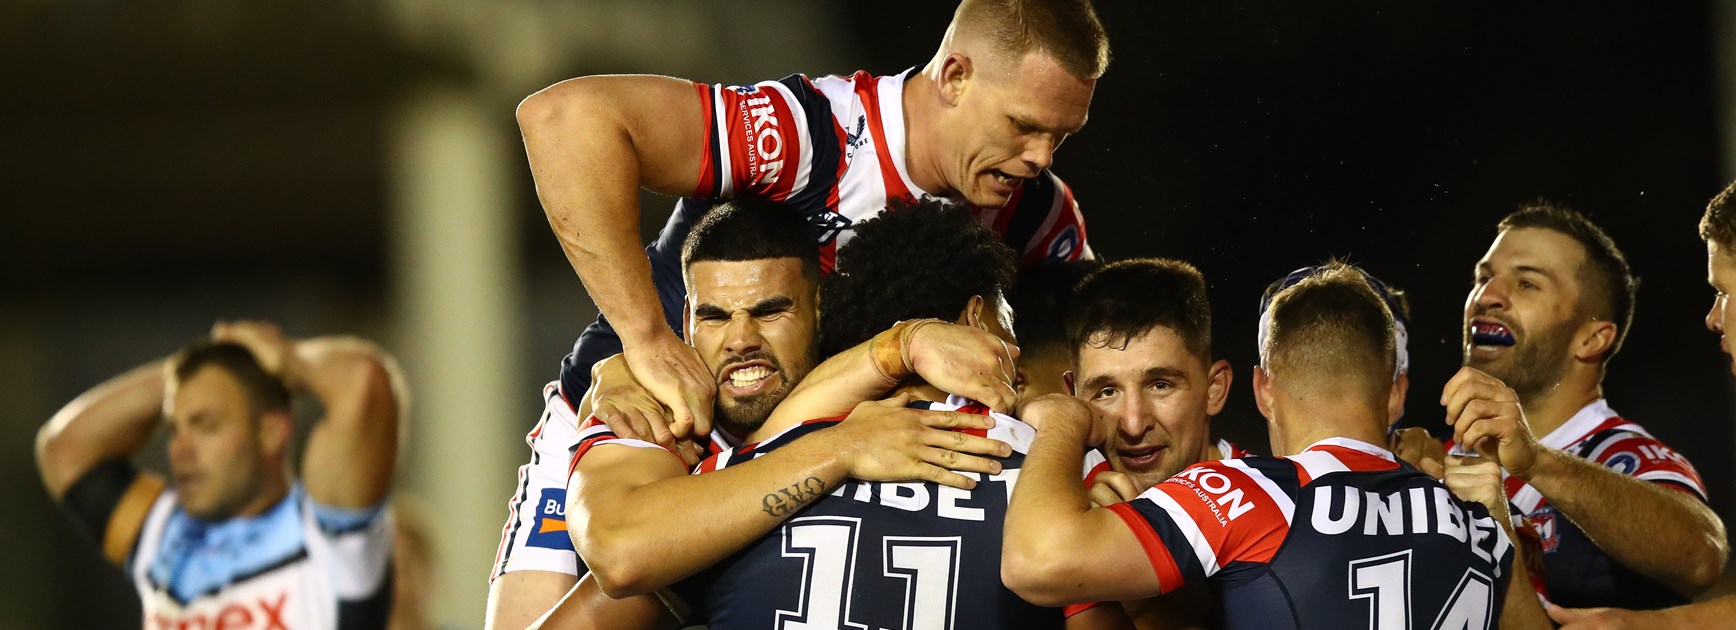 'There were many ways to lose': Inside chaos of 'gutsiest' Roosters win